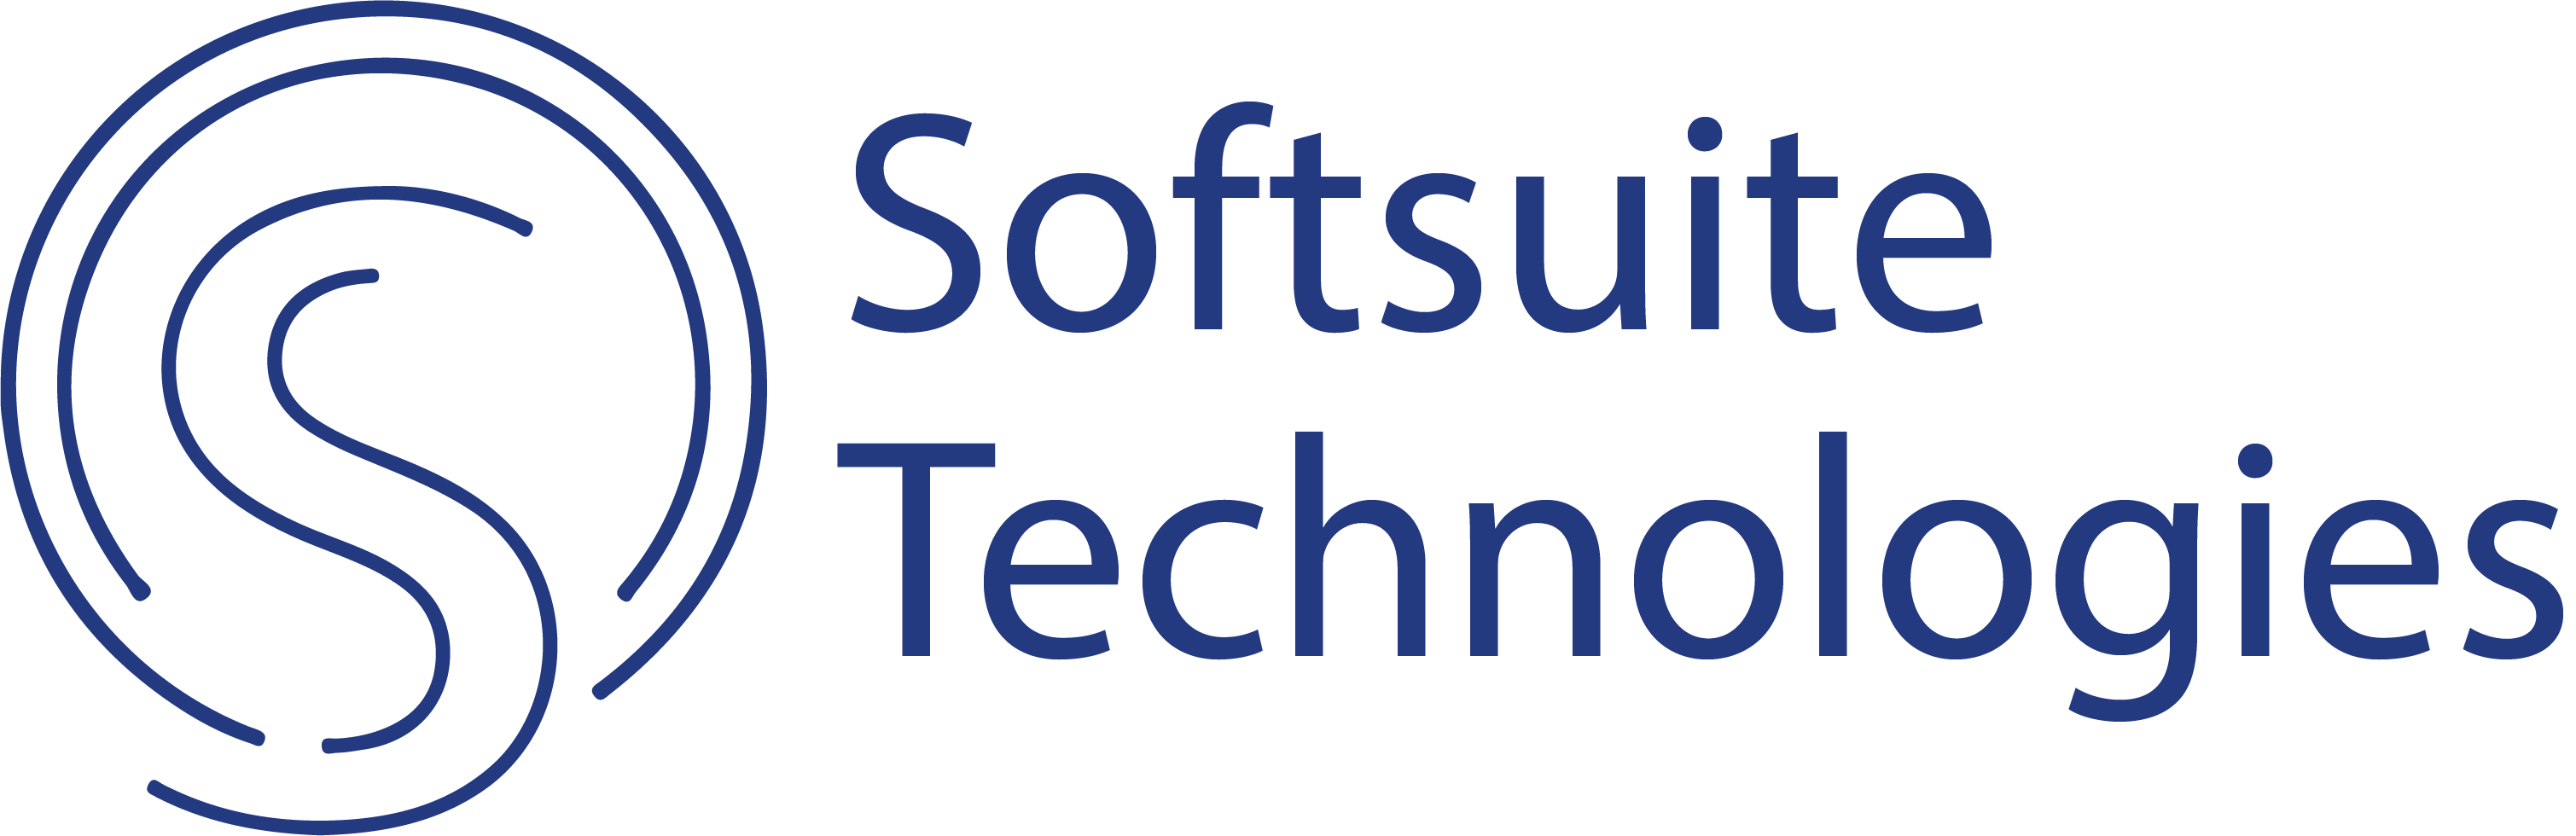 softsuite technologies